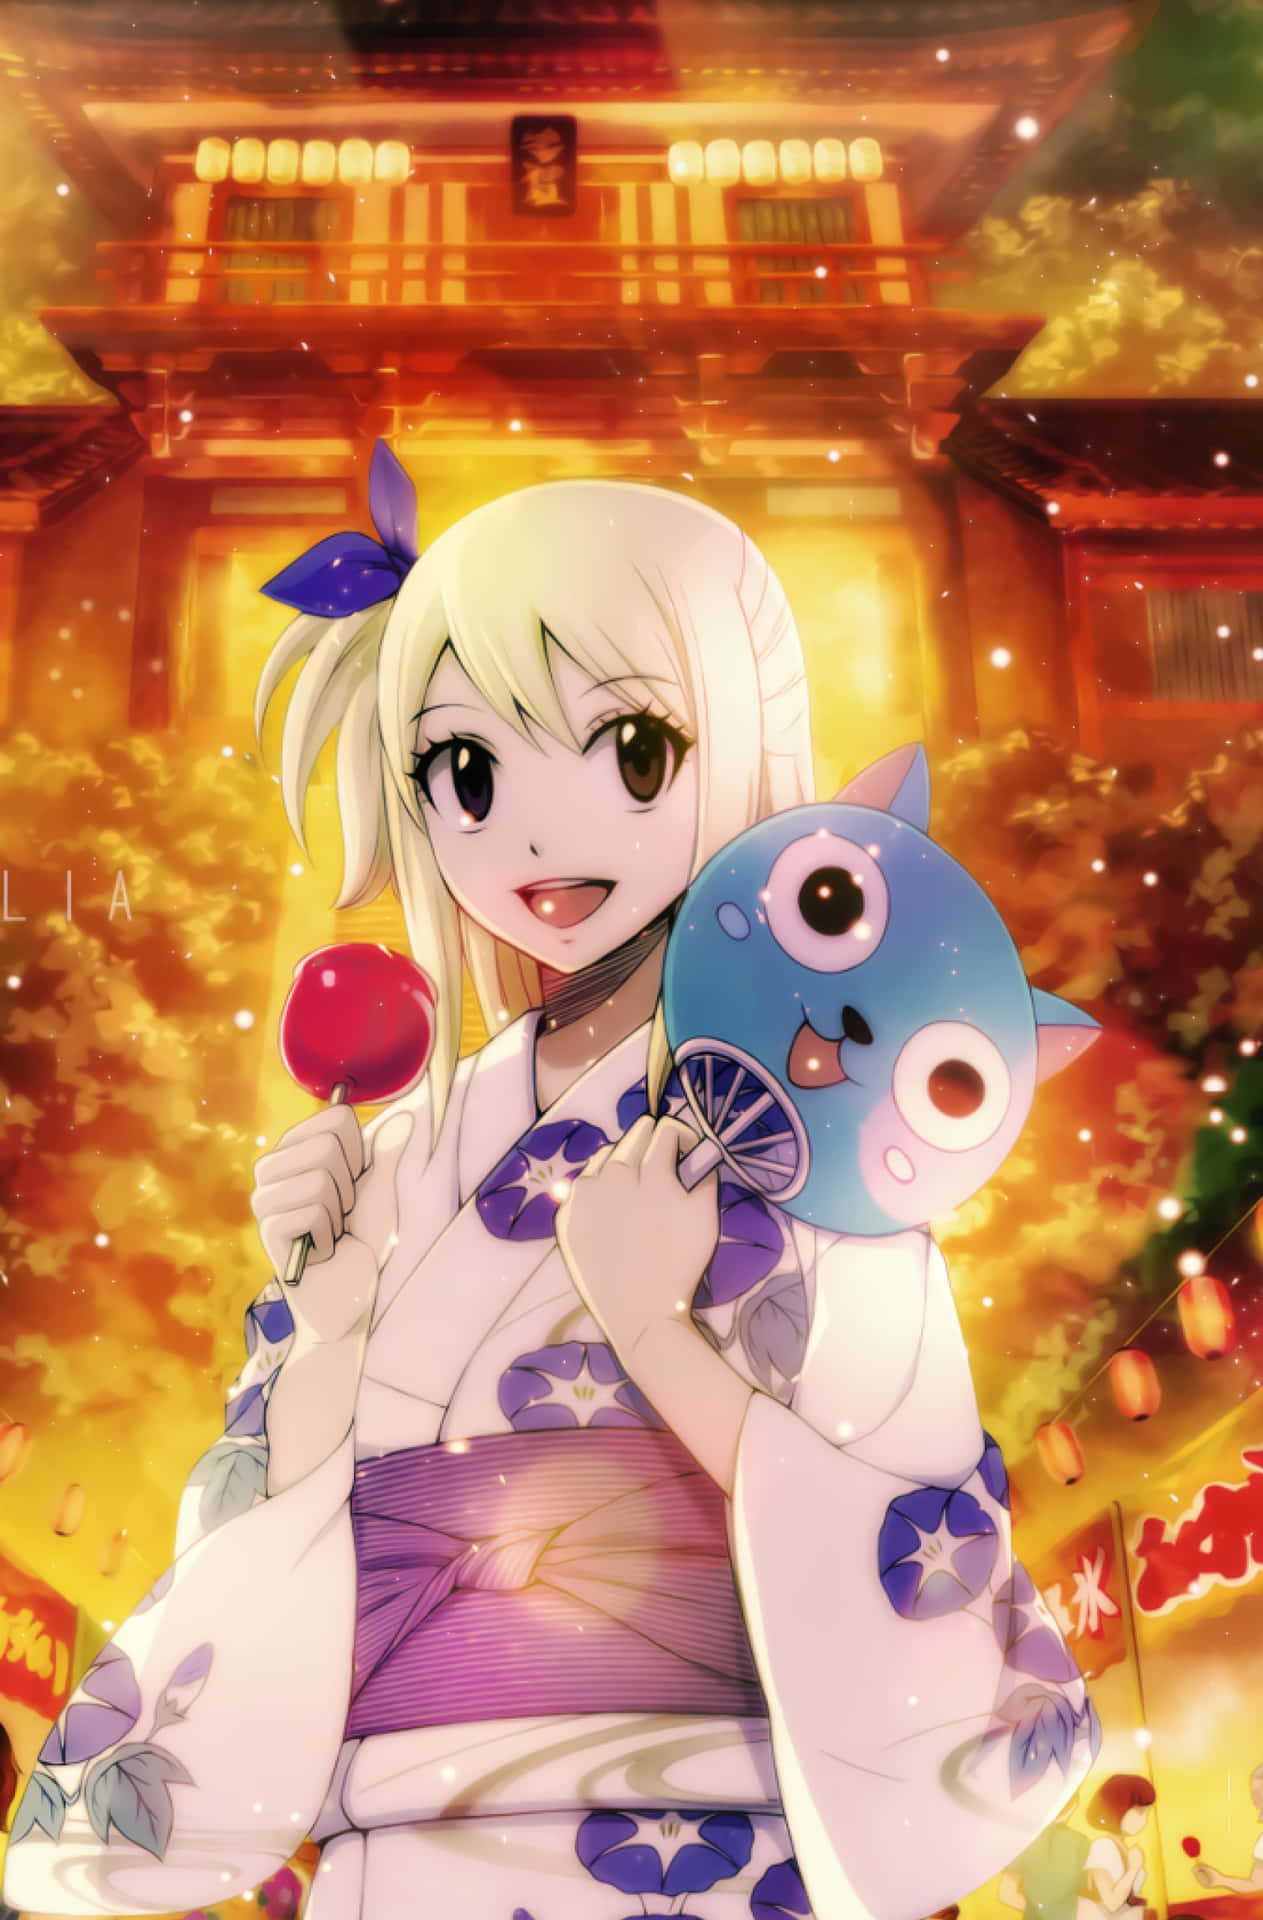 Lucy Heartfilia - A Character Defined By Bravery, Friendship, And Magic Background